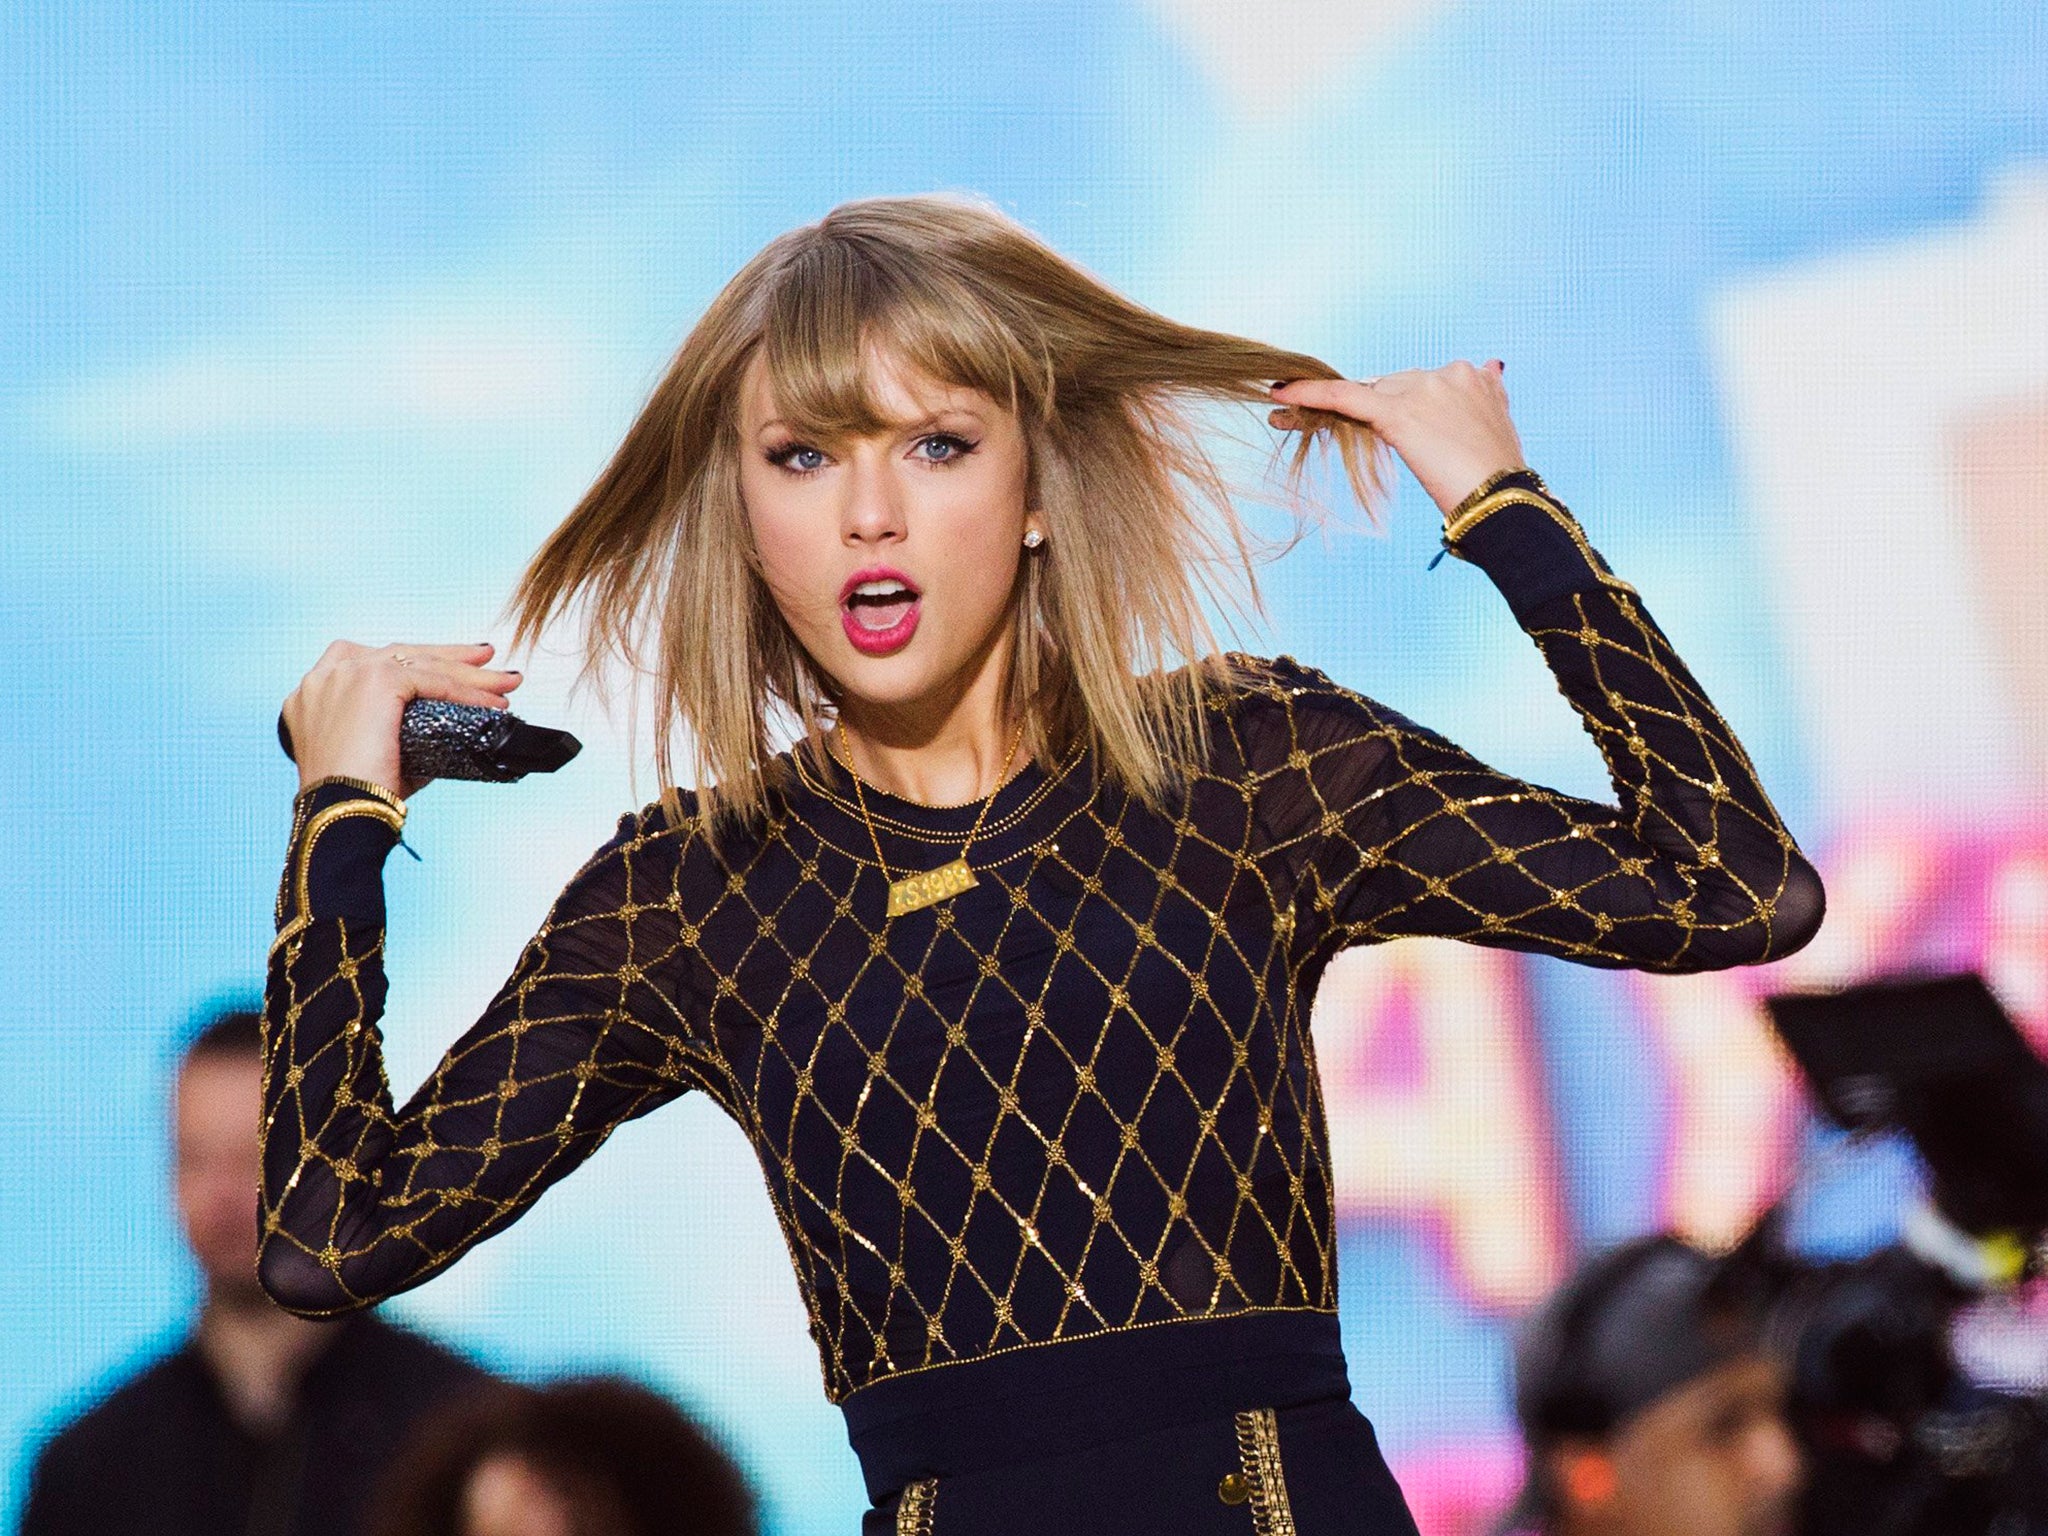 Singer Taylor Swift performs on ABC's 'Good Morning America' to promote her new album '1989' in New York